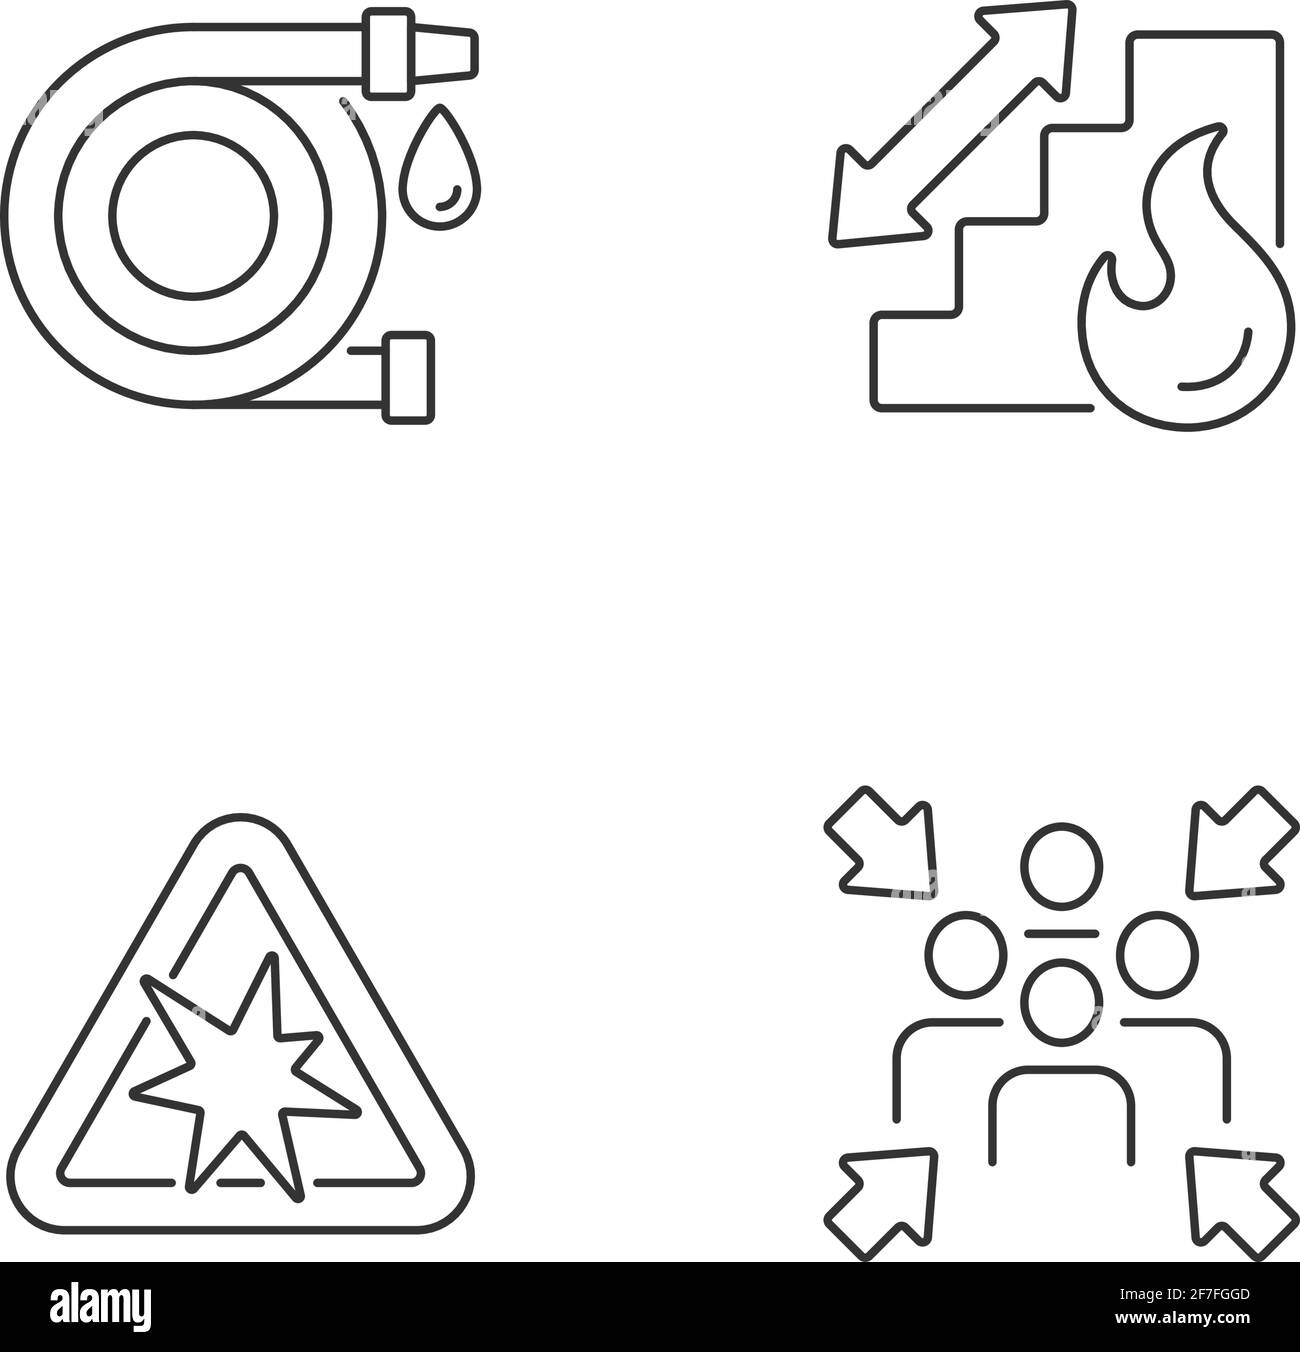 Office fire safety instructions linear icons set Stock Vector